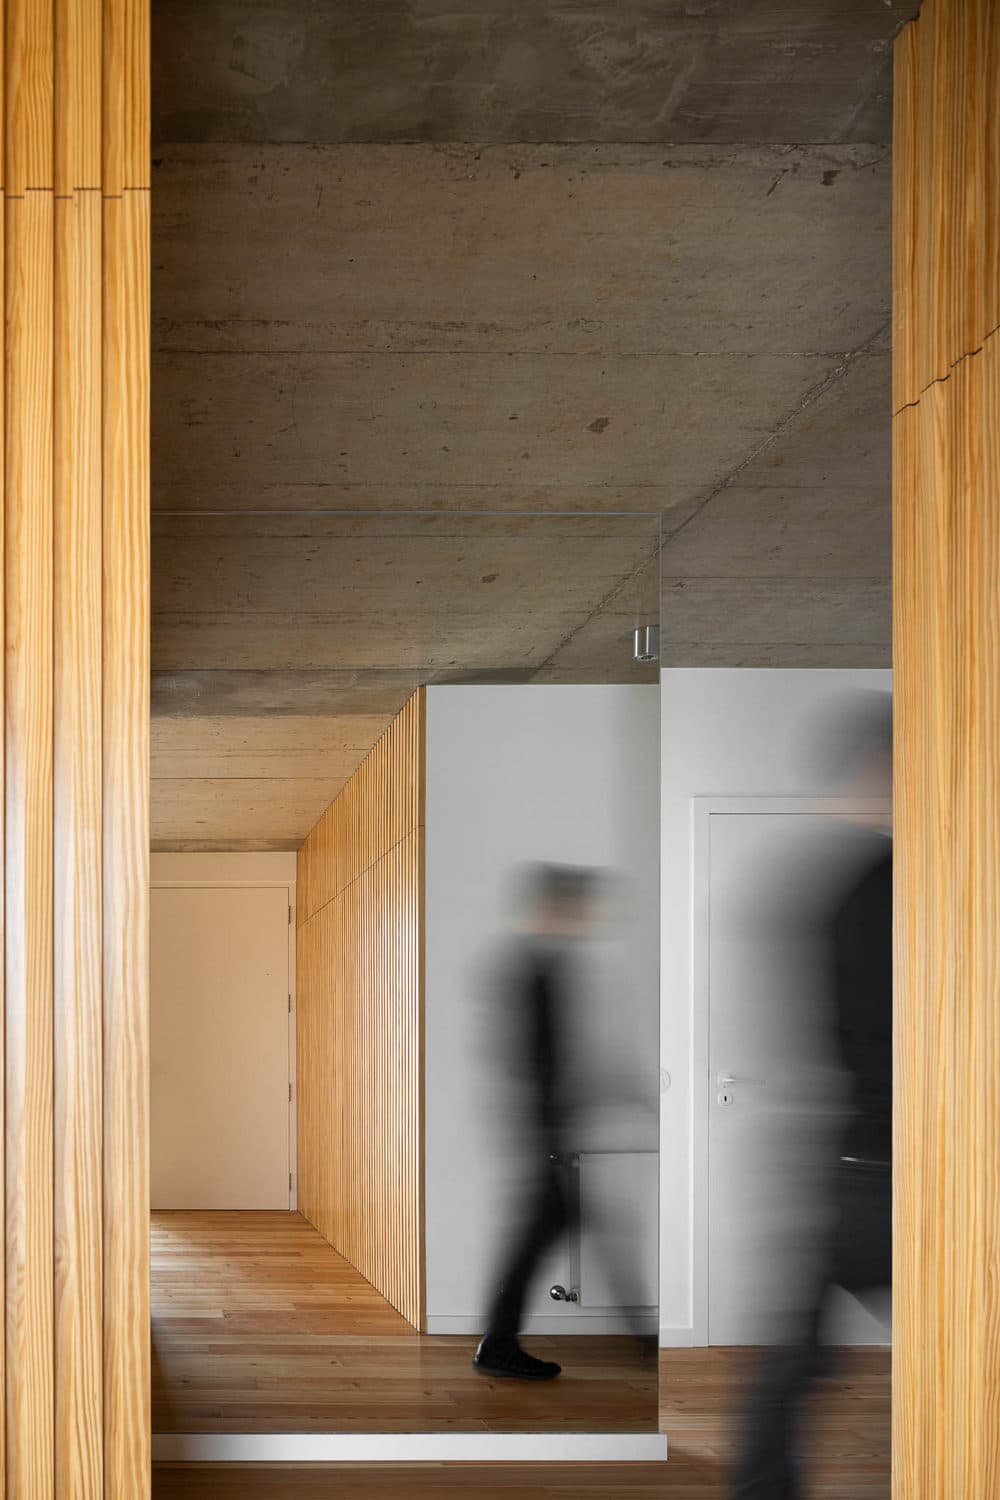 Concrete and Riga Wood Create Interior Confort in a Rural House